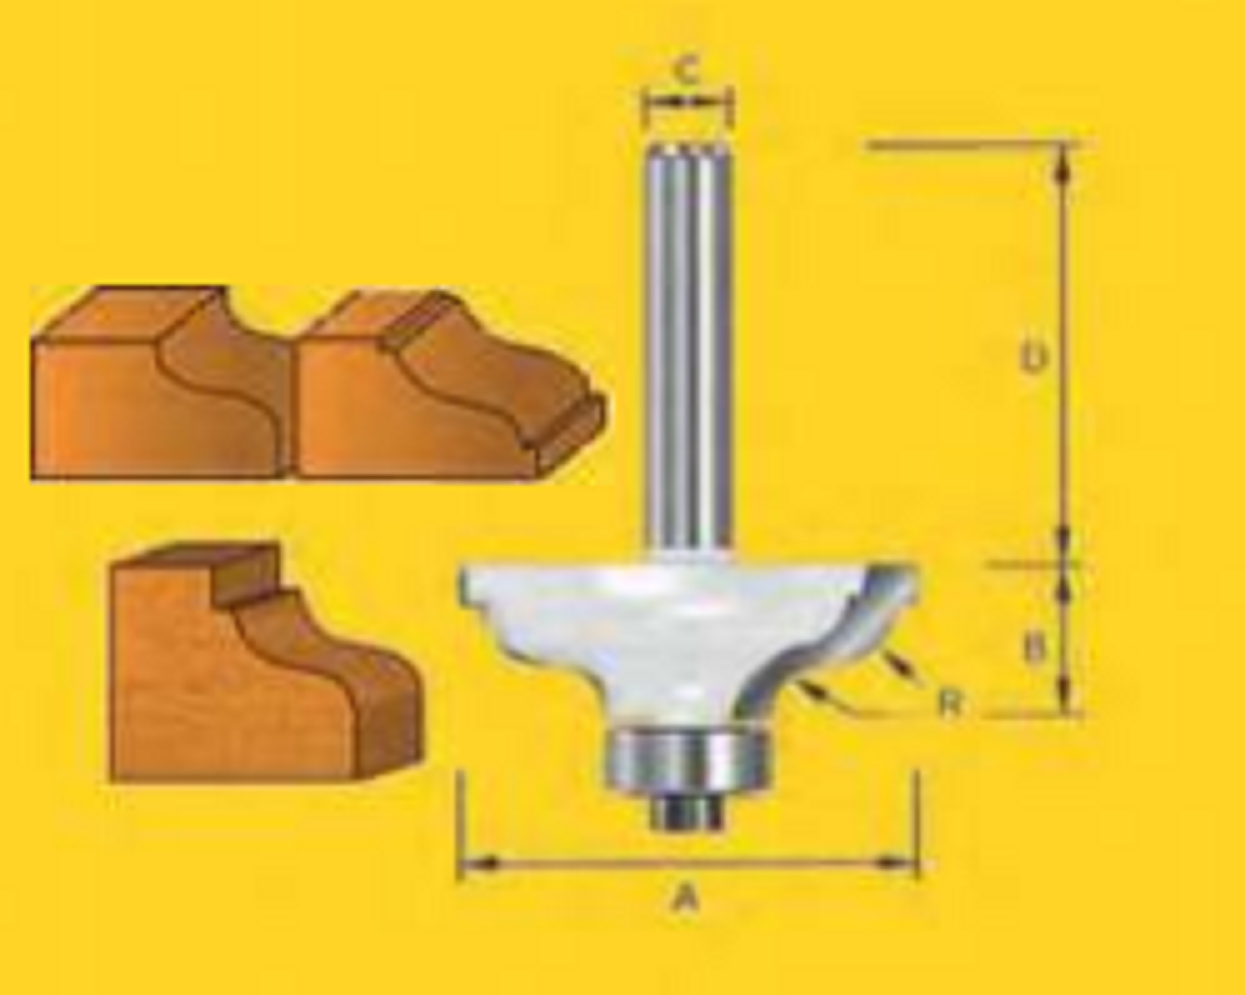 Router Bits - Edge Forming Bits - 6.4mm Ogee Bit with Top Fillet - 1/2" Shank - TruaCuT